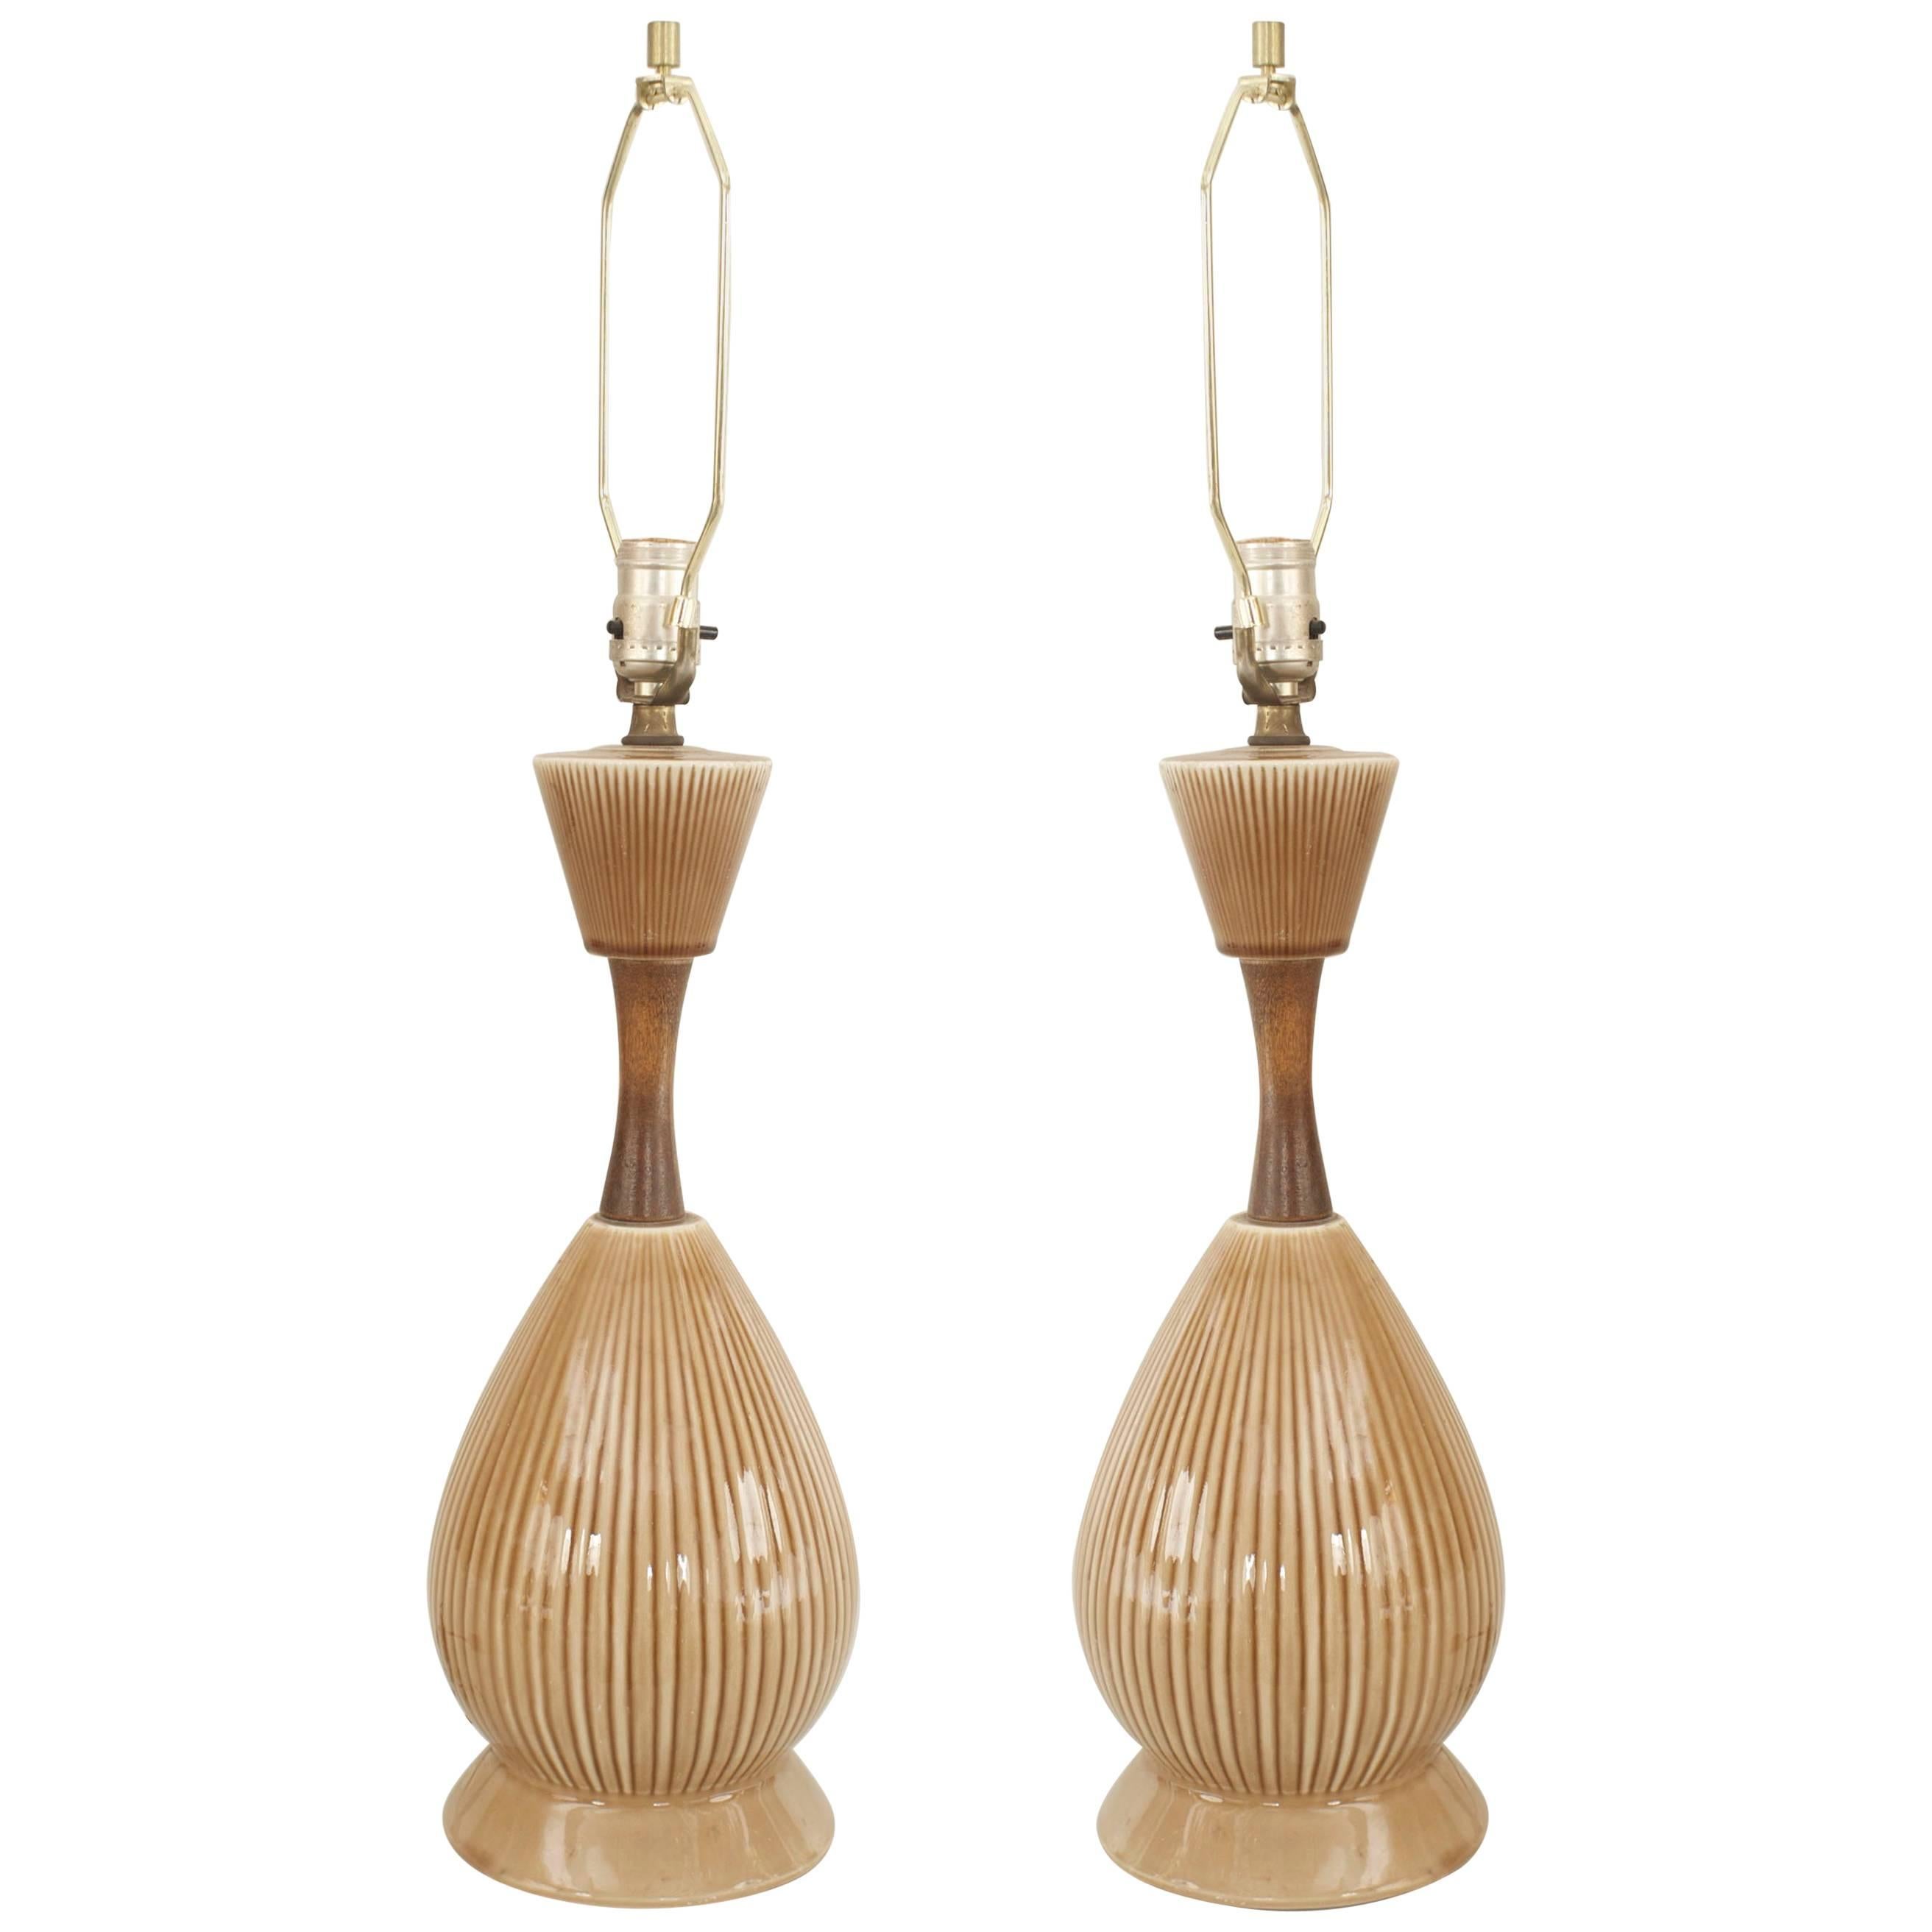 Pair of American Mid-Century Beige Porcelain Table Lamps